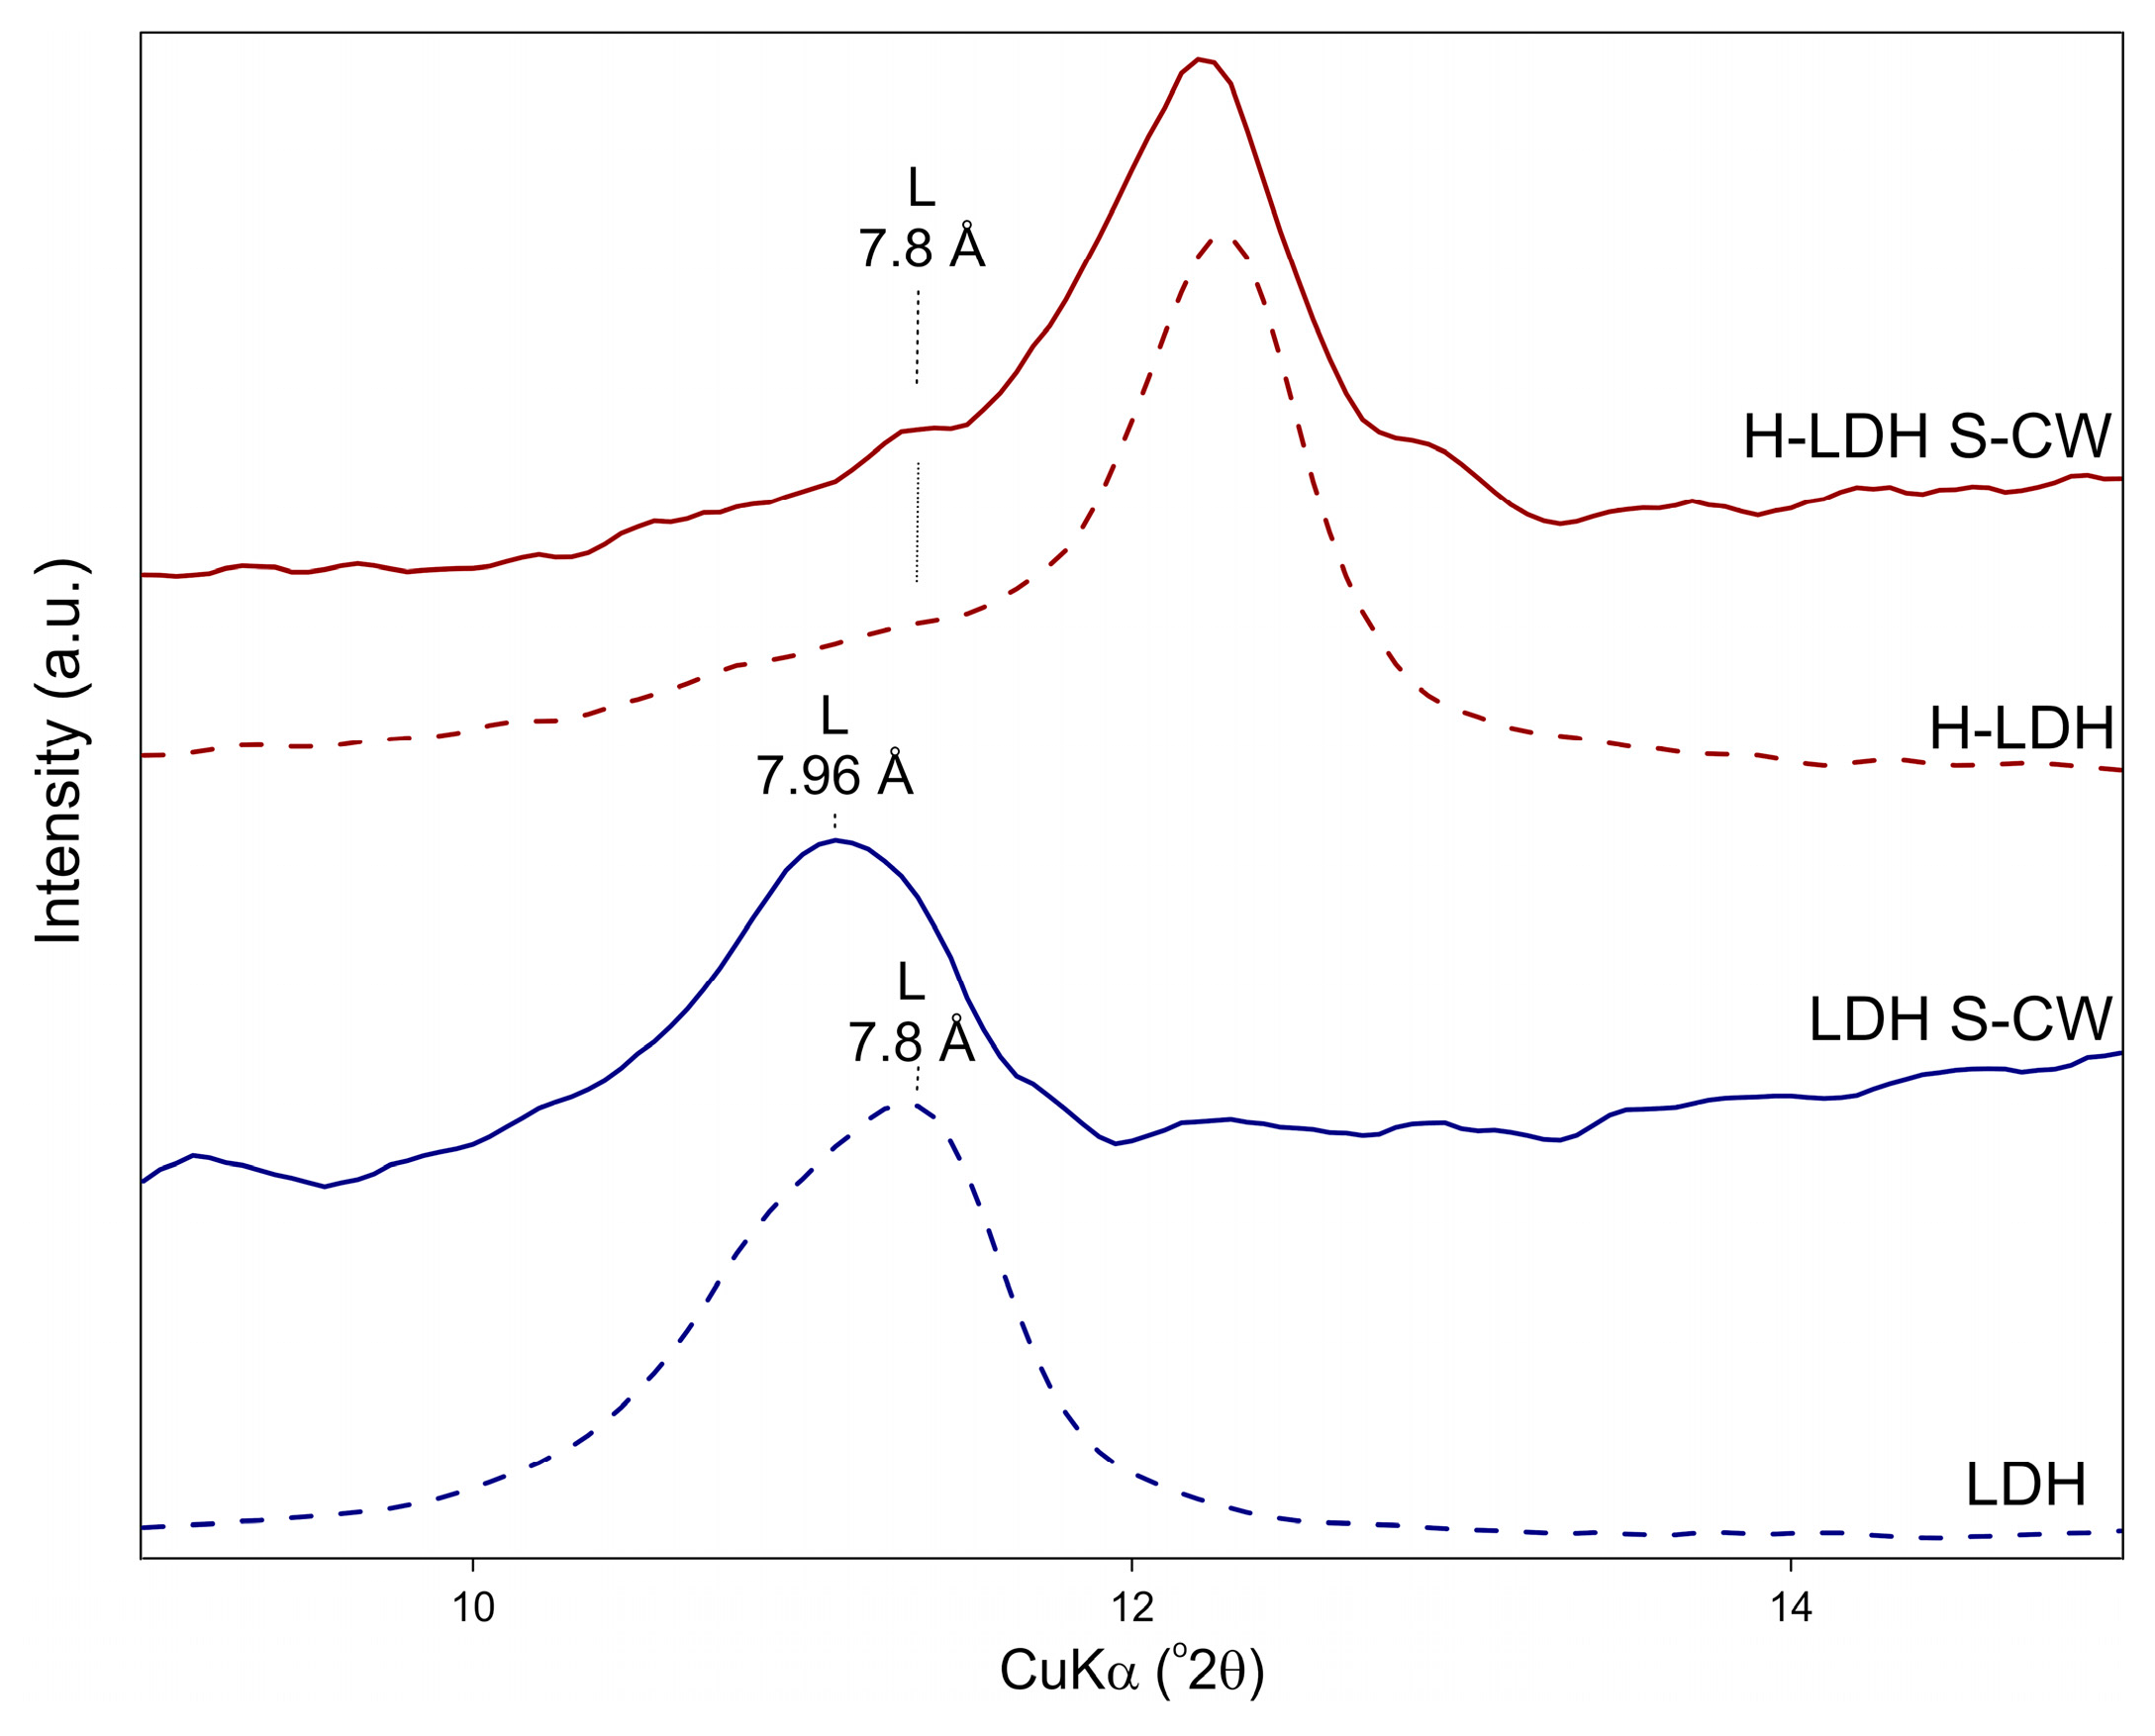 Materials Free Full Text Removal Of Chromates And Sulphates By Mg Fe Ldh And Heterostructured Ldh Halloysite Materials Efficiency Selectivity And Stability Of Adsorbents In Single And Multi Element Systems Html